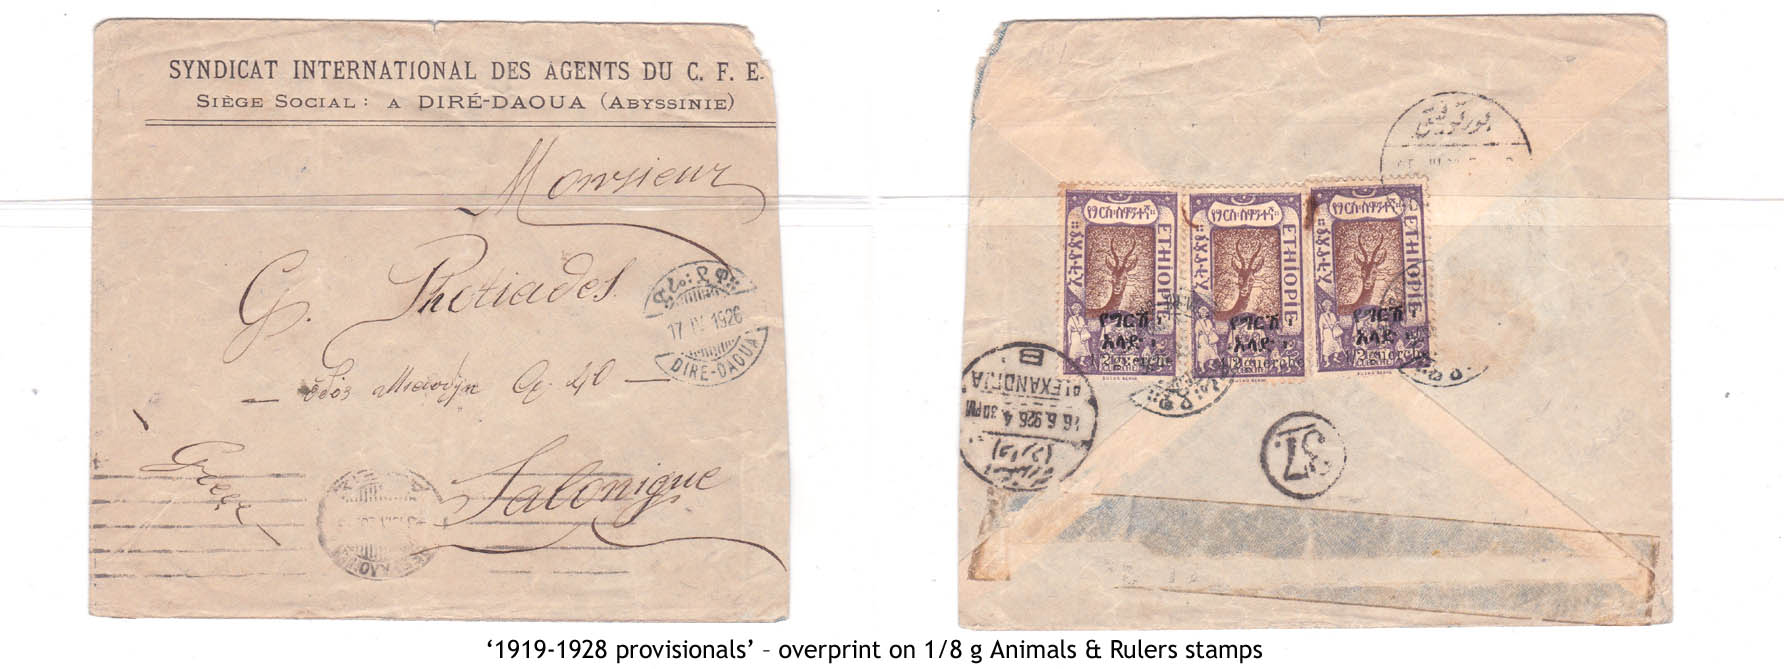 1919-1928 provisionals’ – overprint on 1-8 g Animals & Rulers stamps